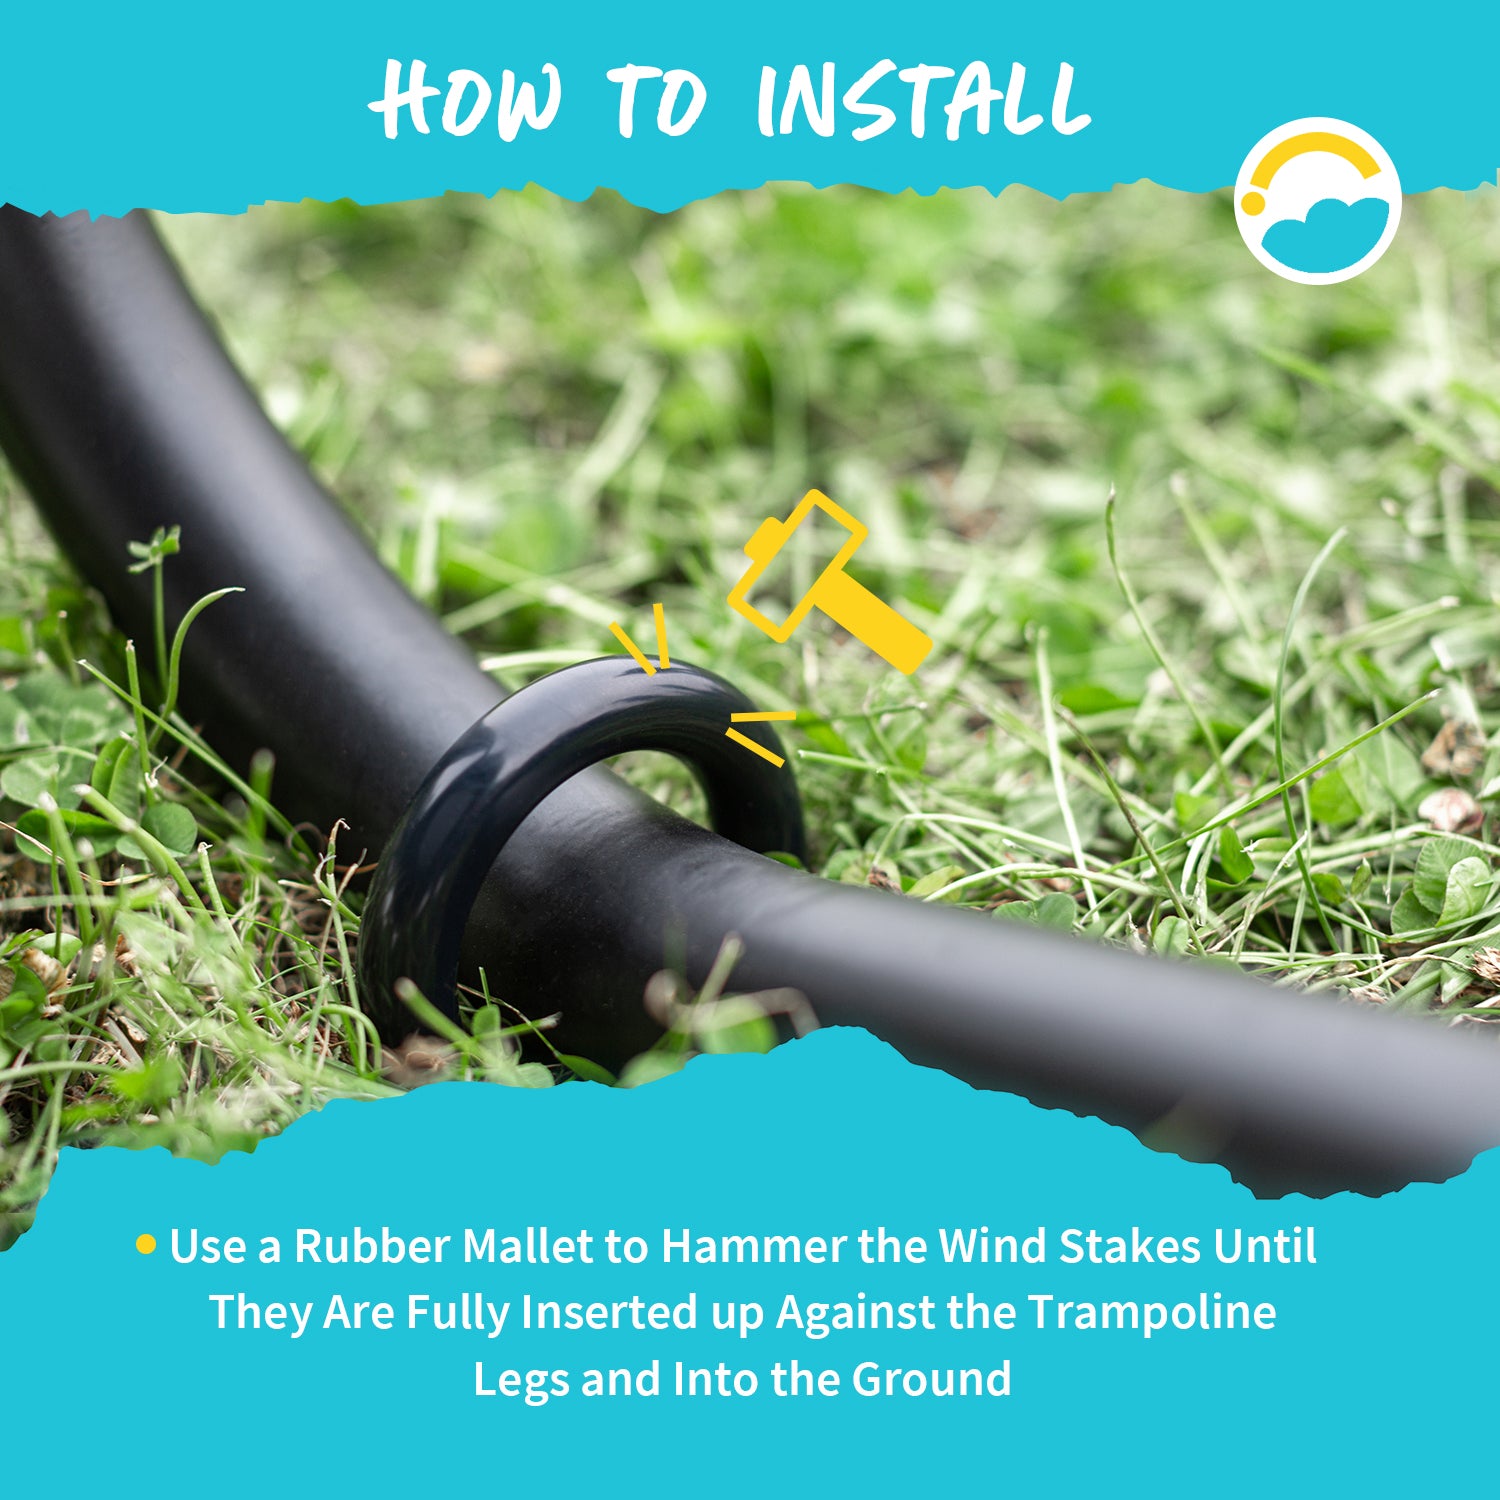 How to Install:  Use a Rubber Mallet to Hammer the Wind Stakes Until They are Fully Inserted up Against the Trampoline Legs and Into the Ground.  